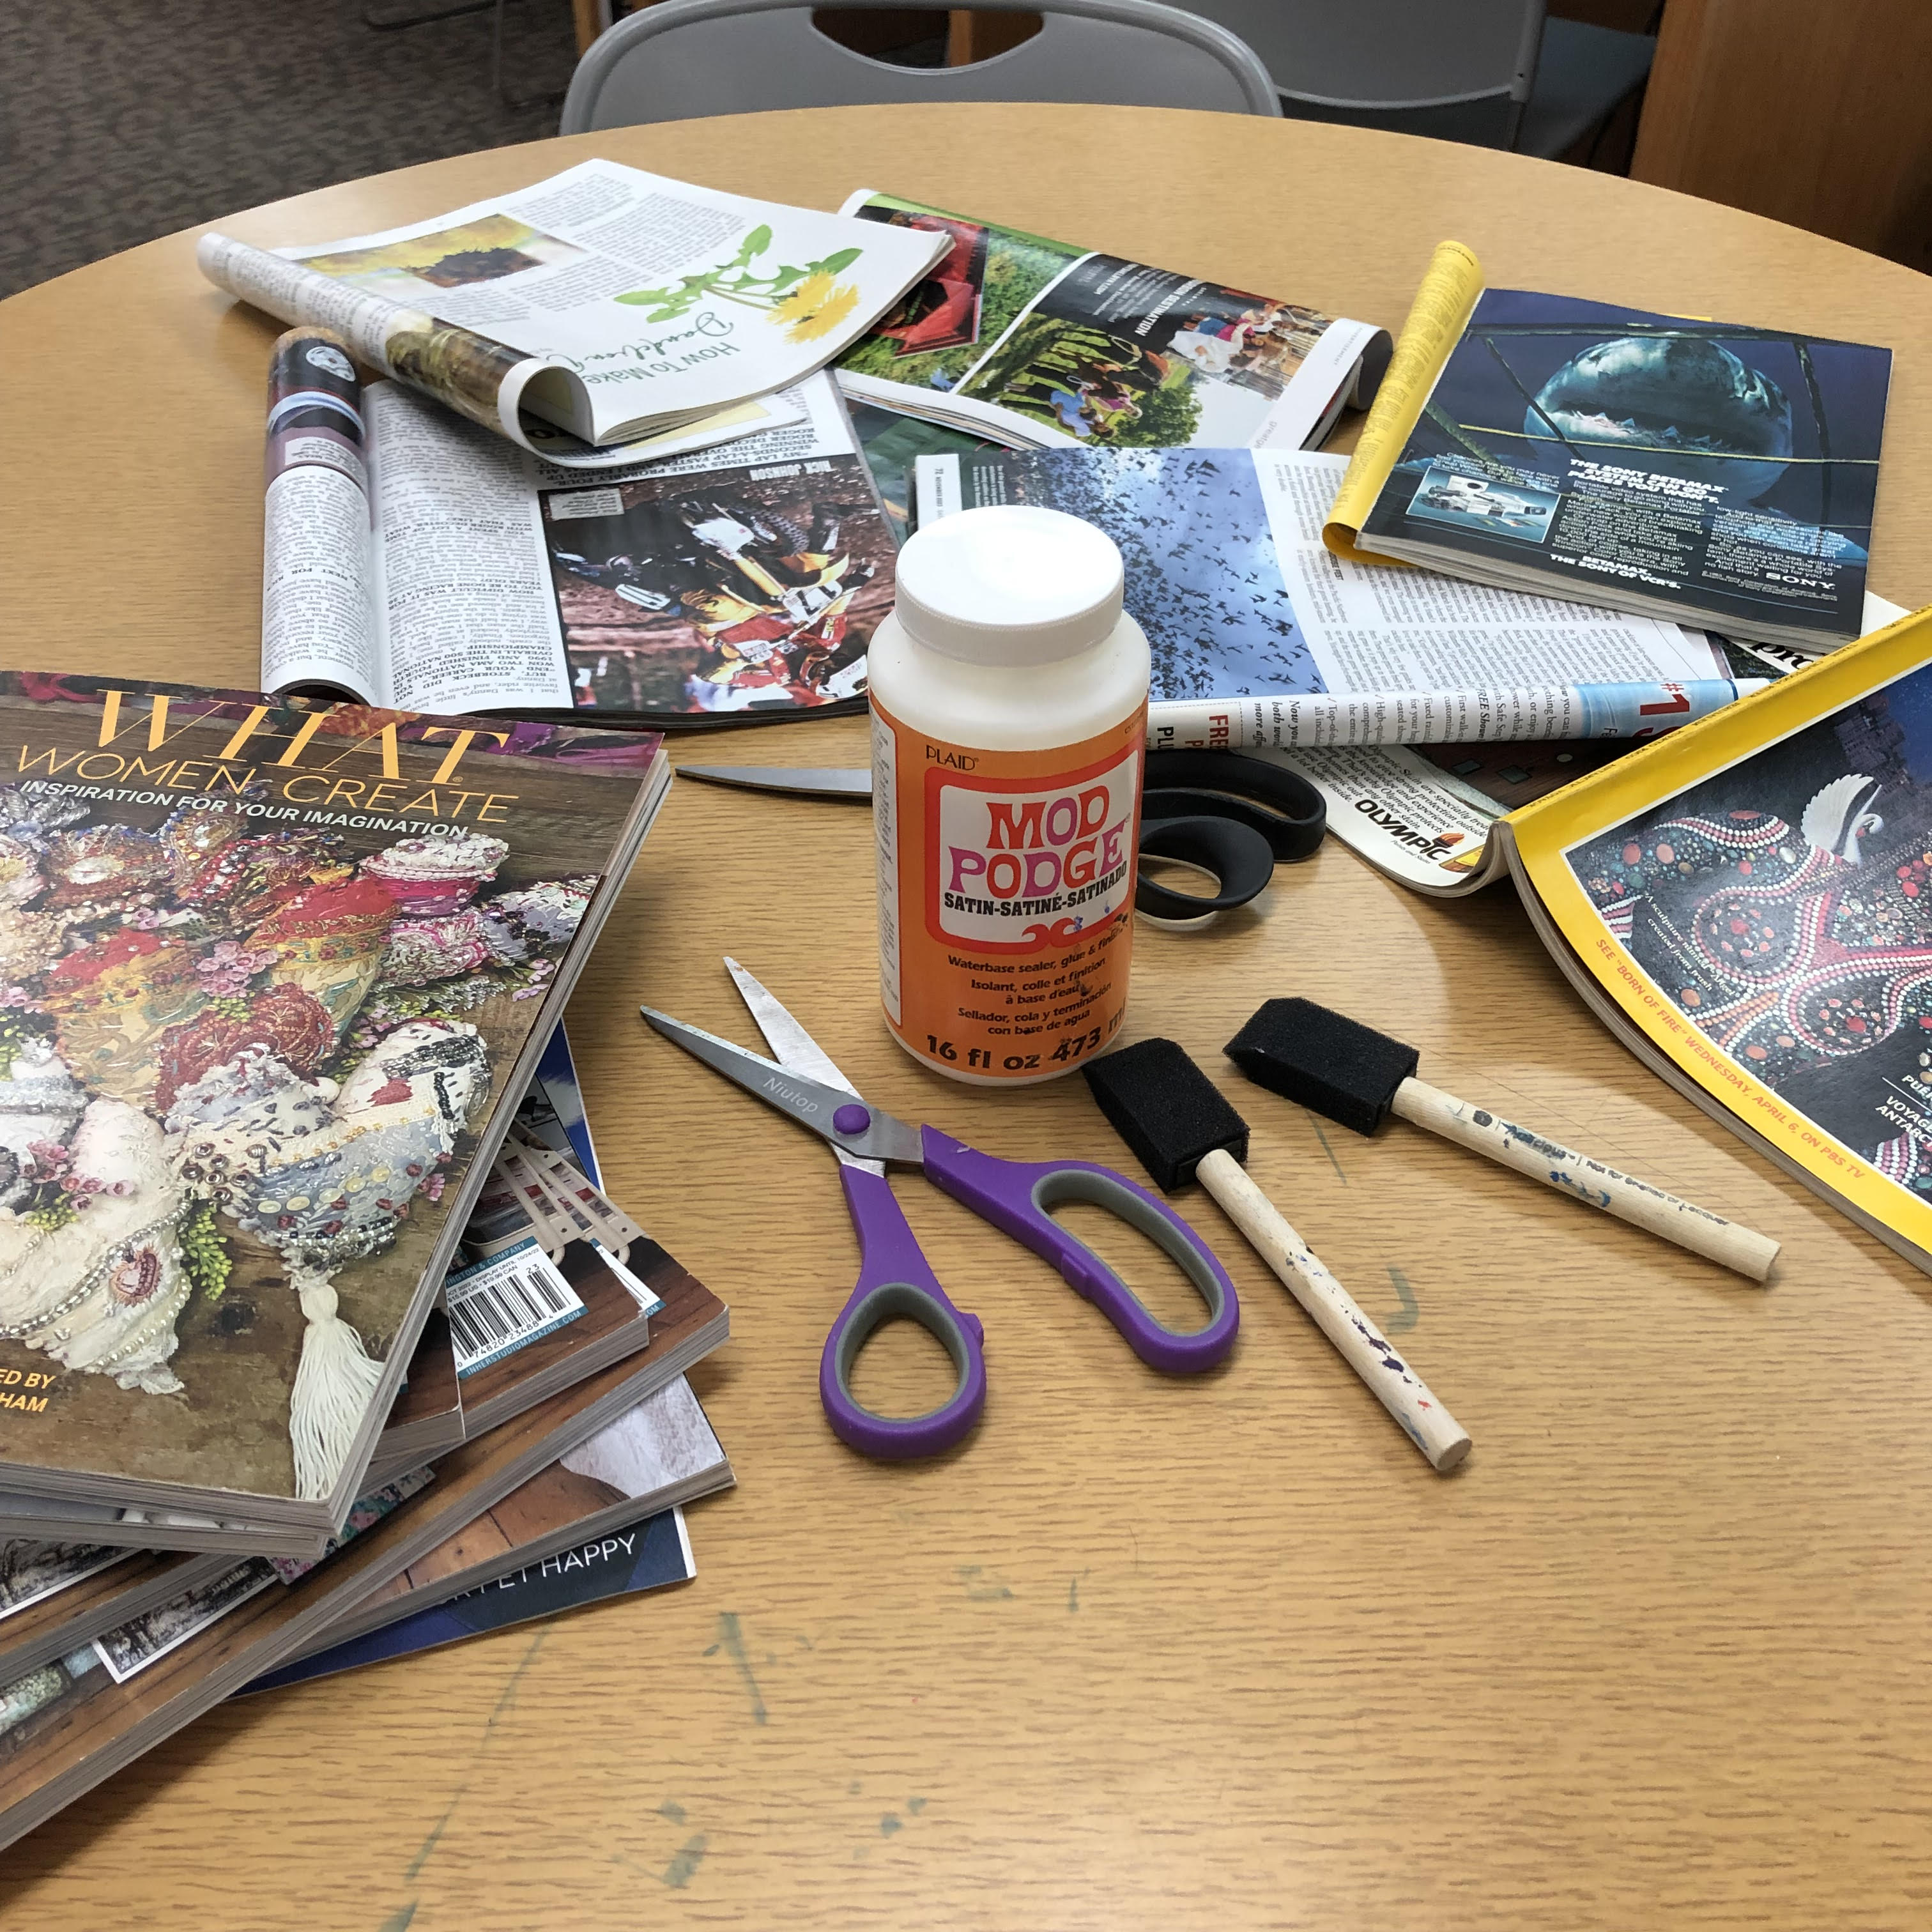 Scissors, Mod Podge, and magazines on a library table